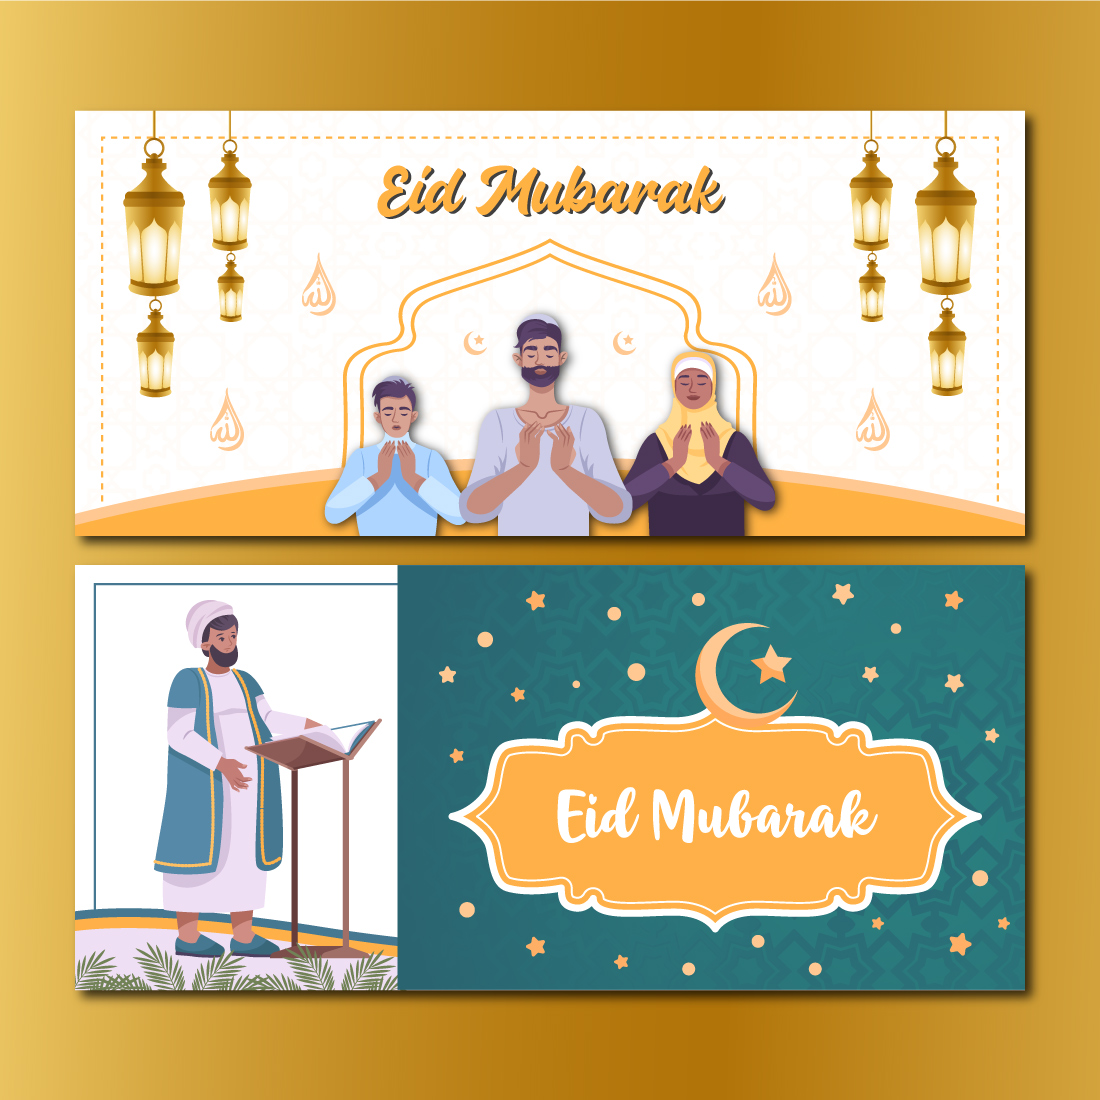 Eid mubarak wishes banner or social media facebook cover design with arabic decoration cover image.